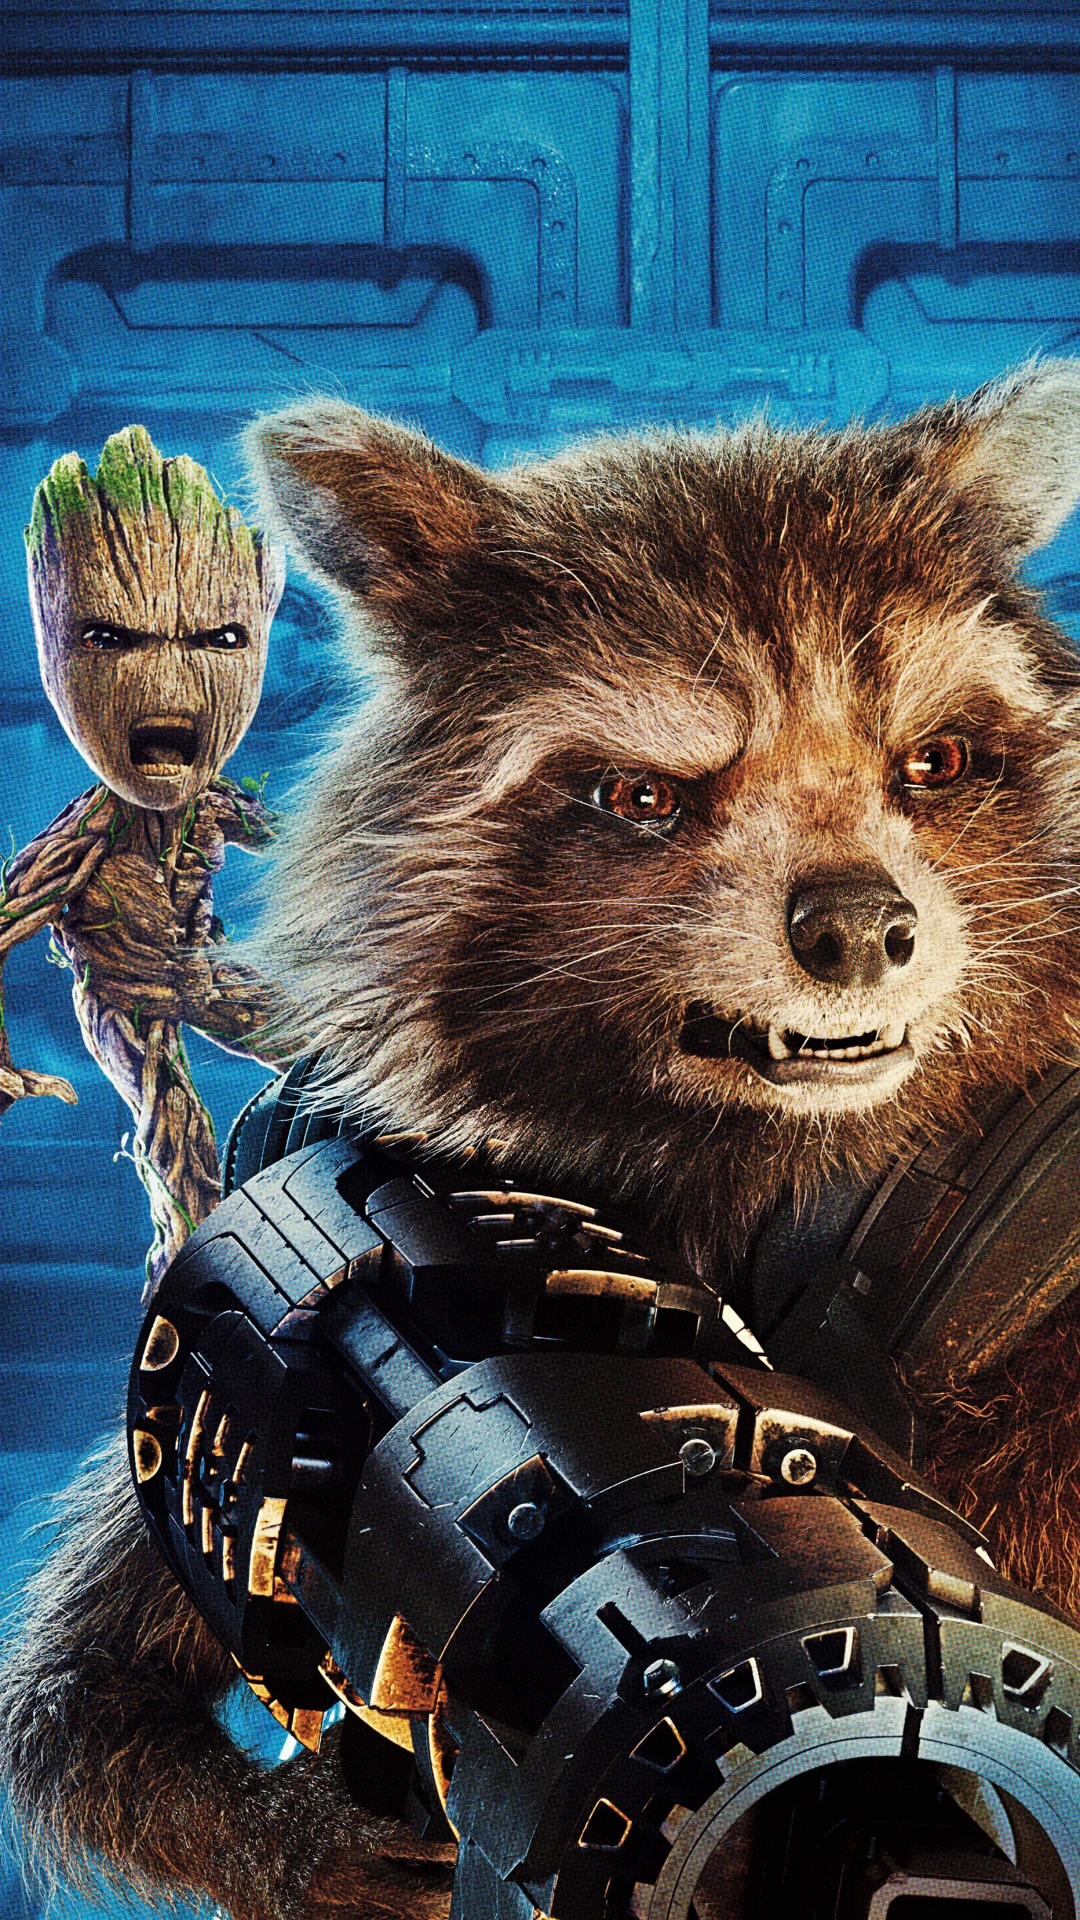 Mobile wallpaper: Movie, Rocket Raccoon, Groot, Guardians Of The Galaxy Vol  2, 1273992 download the picture for free.